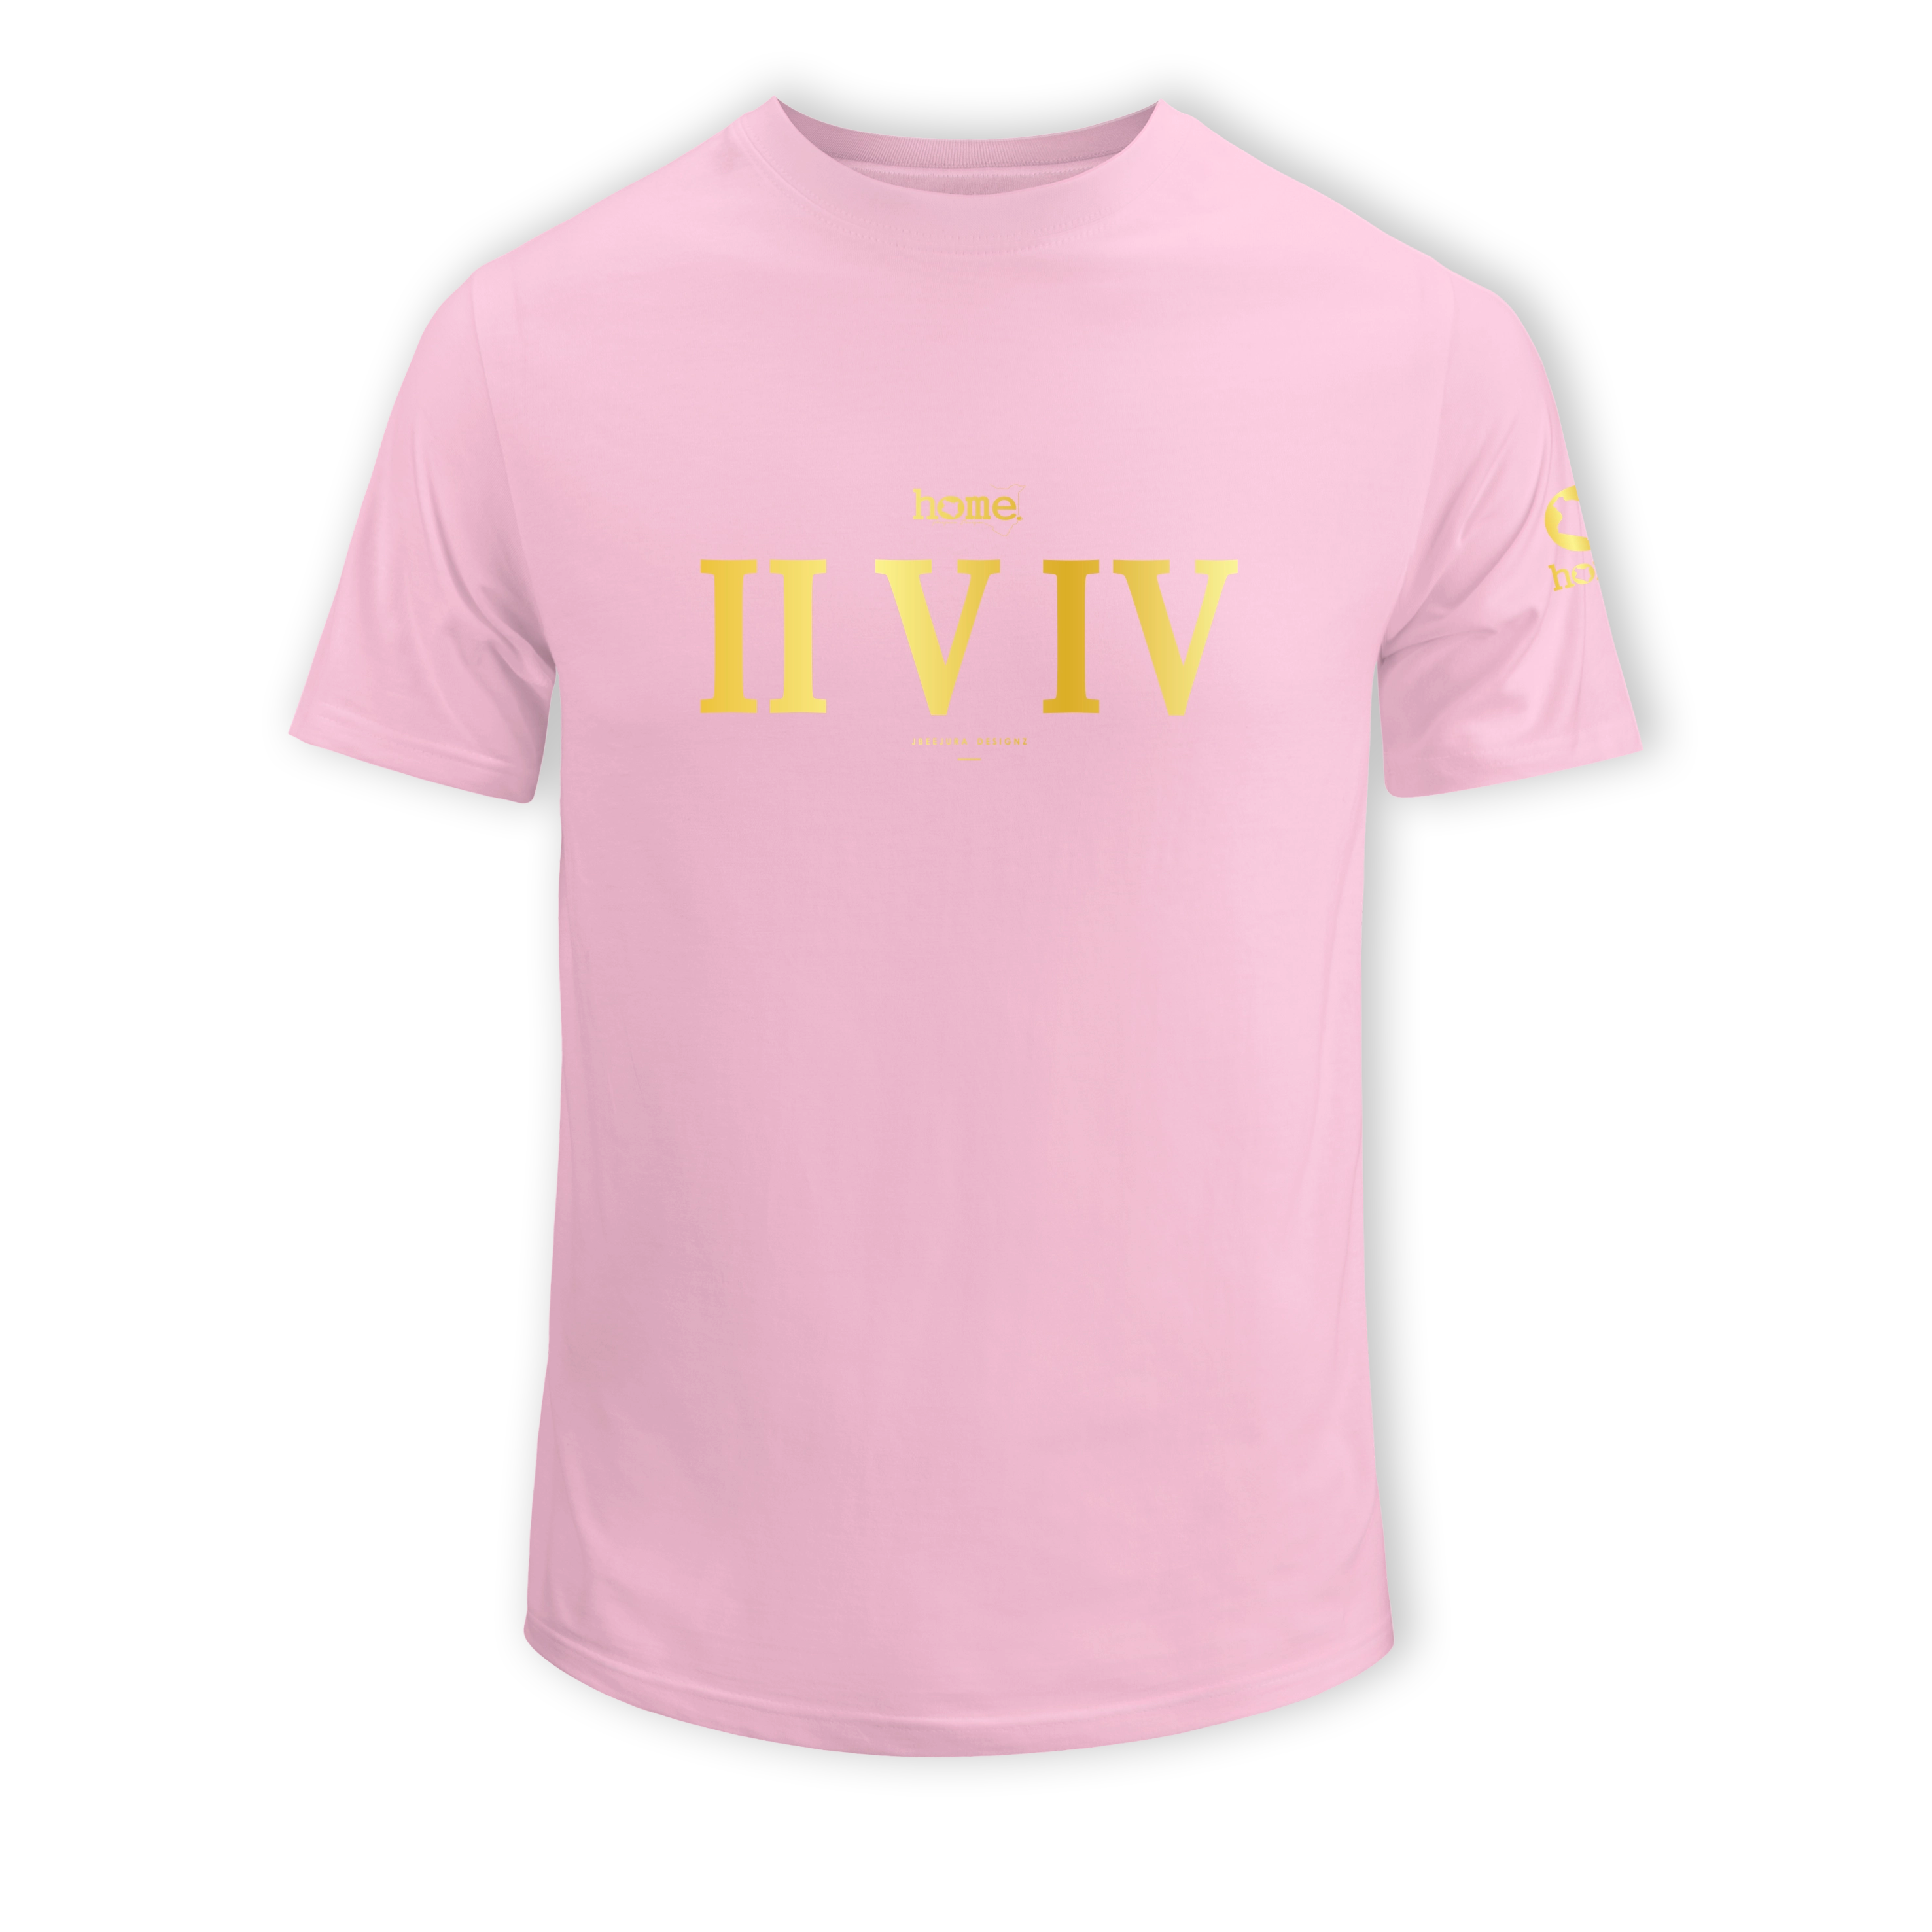 home_254 KIDS SHORT-SLEEVED PINK T-SHIRT WITH A GOLD ROMAN NUMERALS PRINT – COTTON PLUS FABRIC